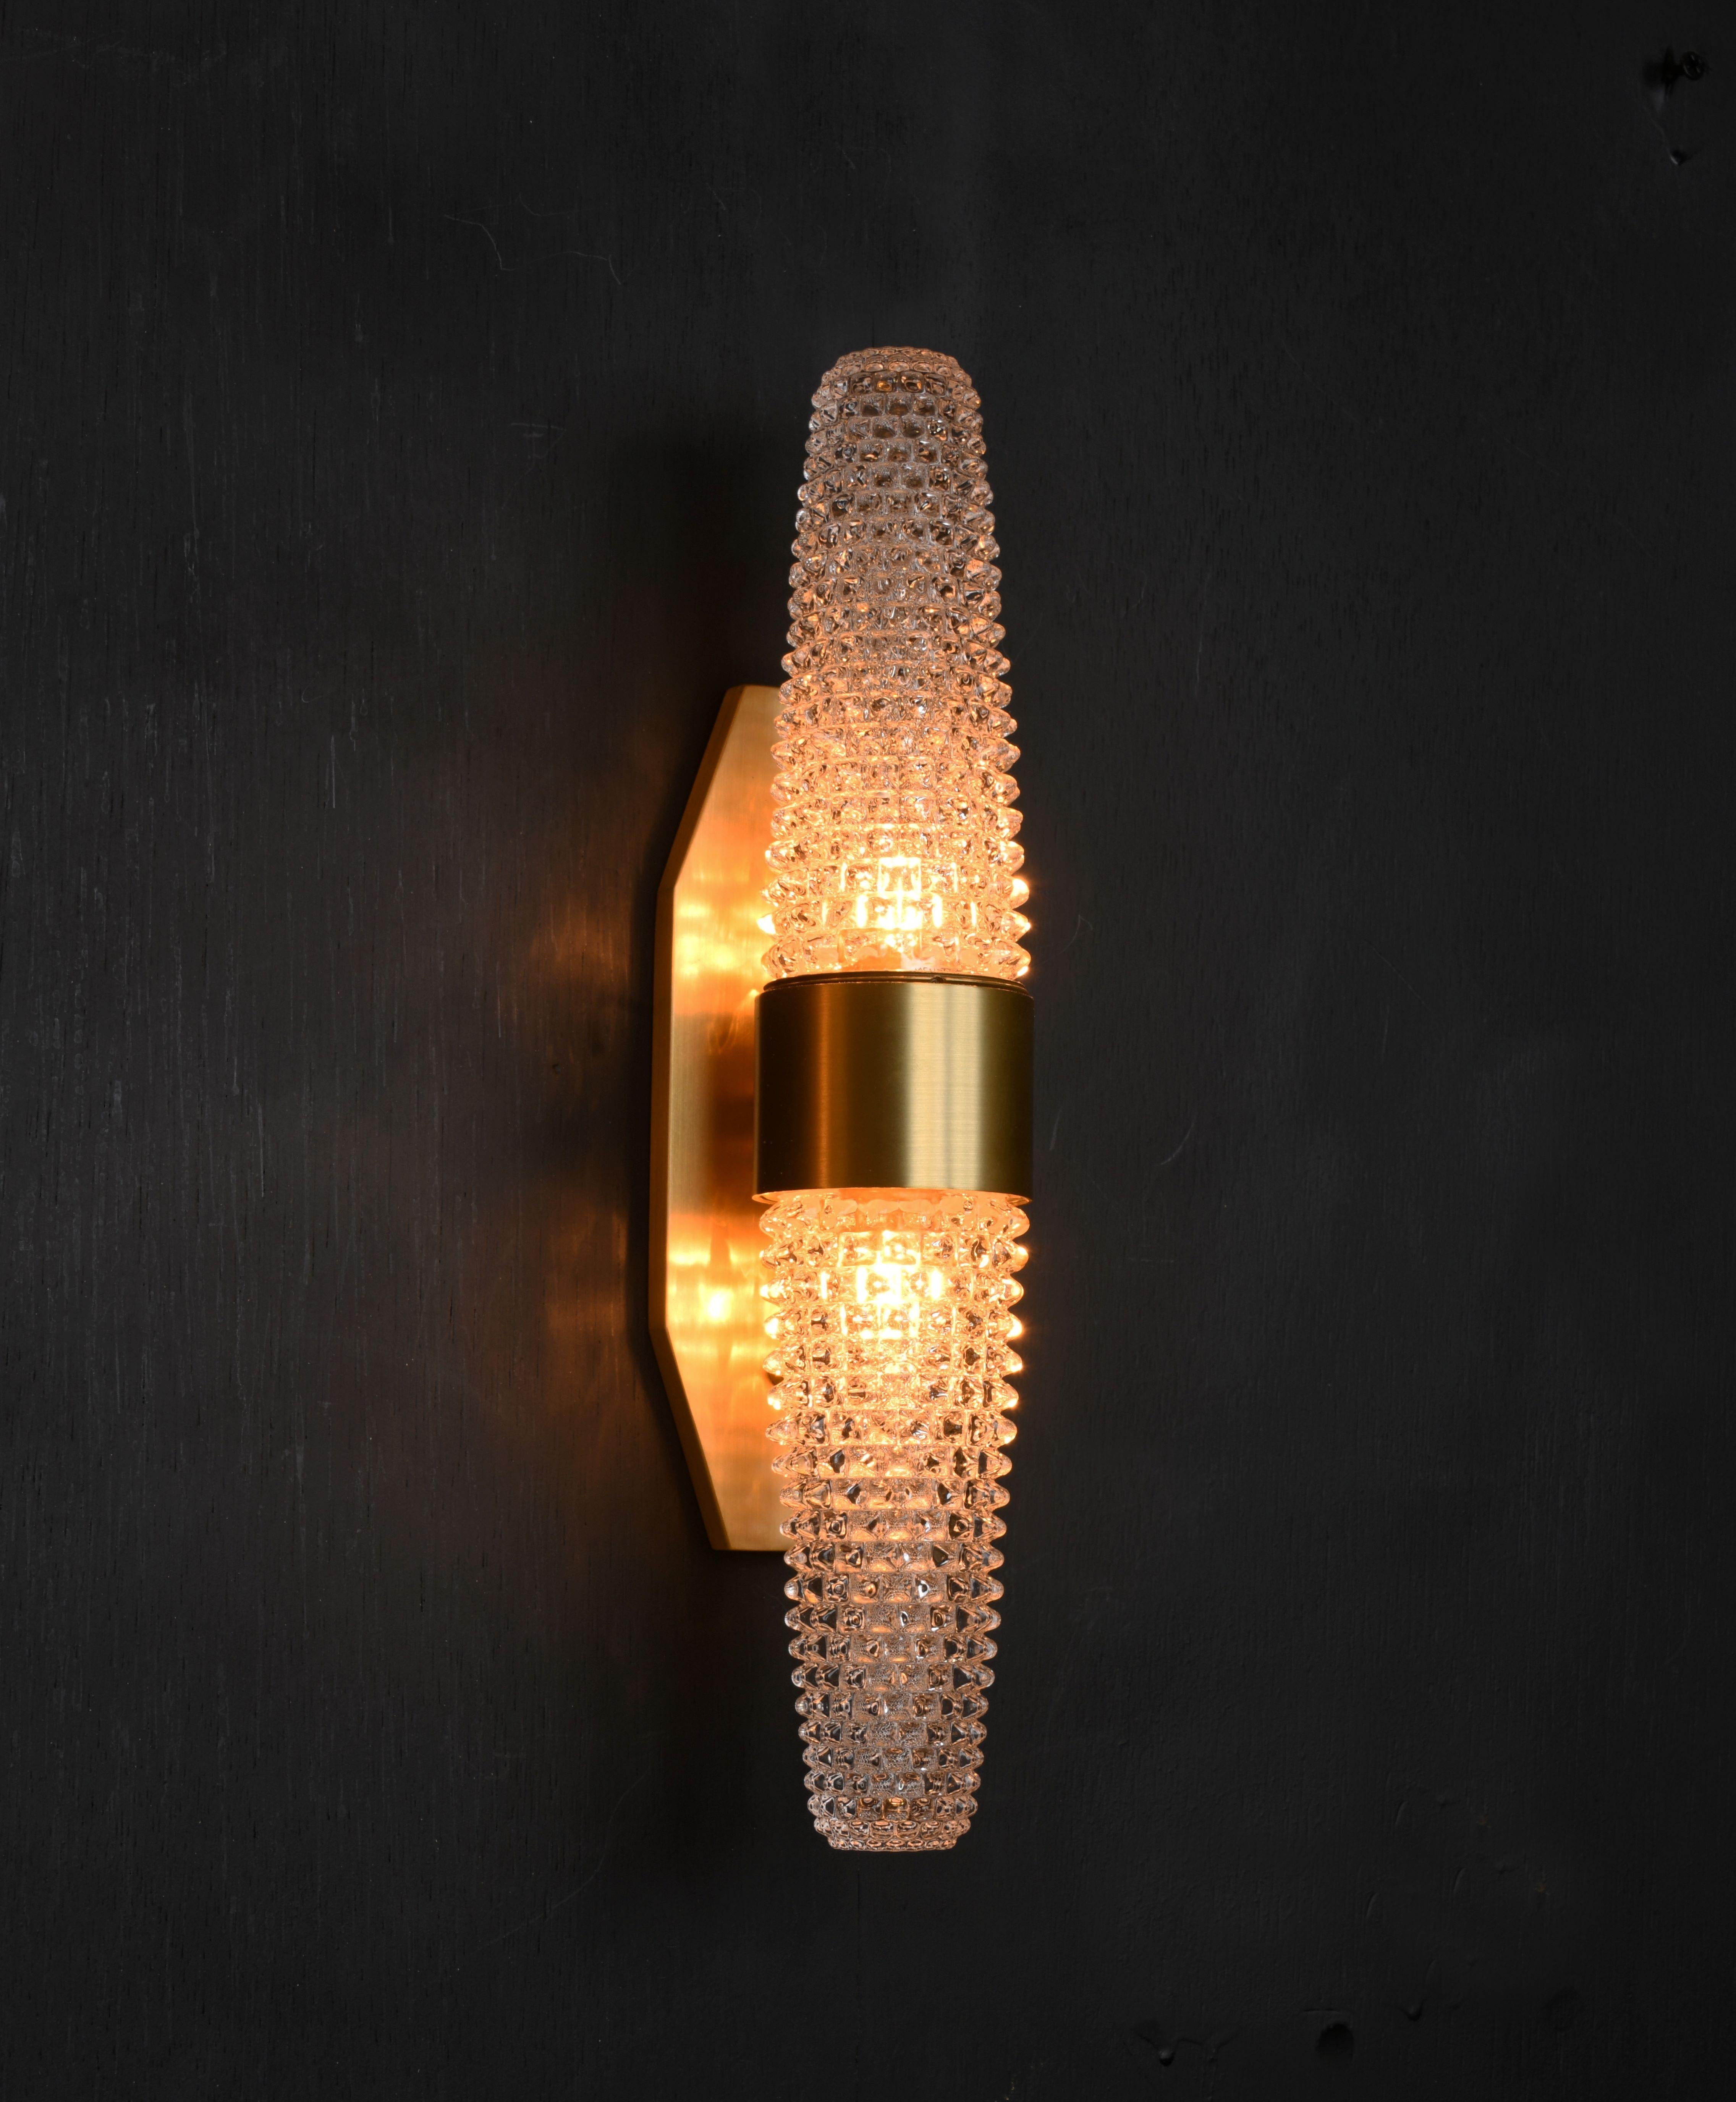 Spiked double glass cones in the ancient Rostrato style sparkle on the modern arms of bold brushed brass with machined details.

Models in the collection are individually hand-crafted by the skilled artisans in our studio. Custom versions tailored